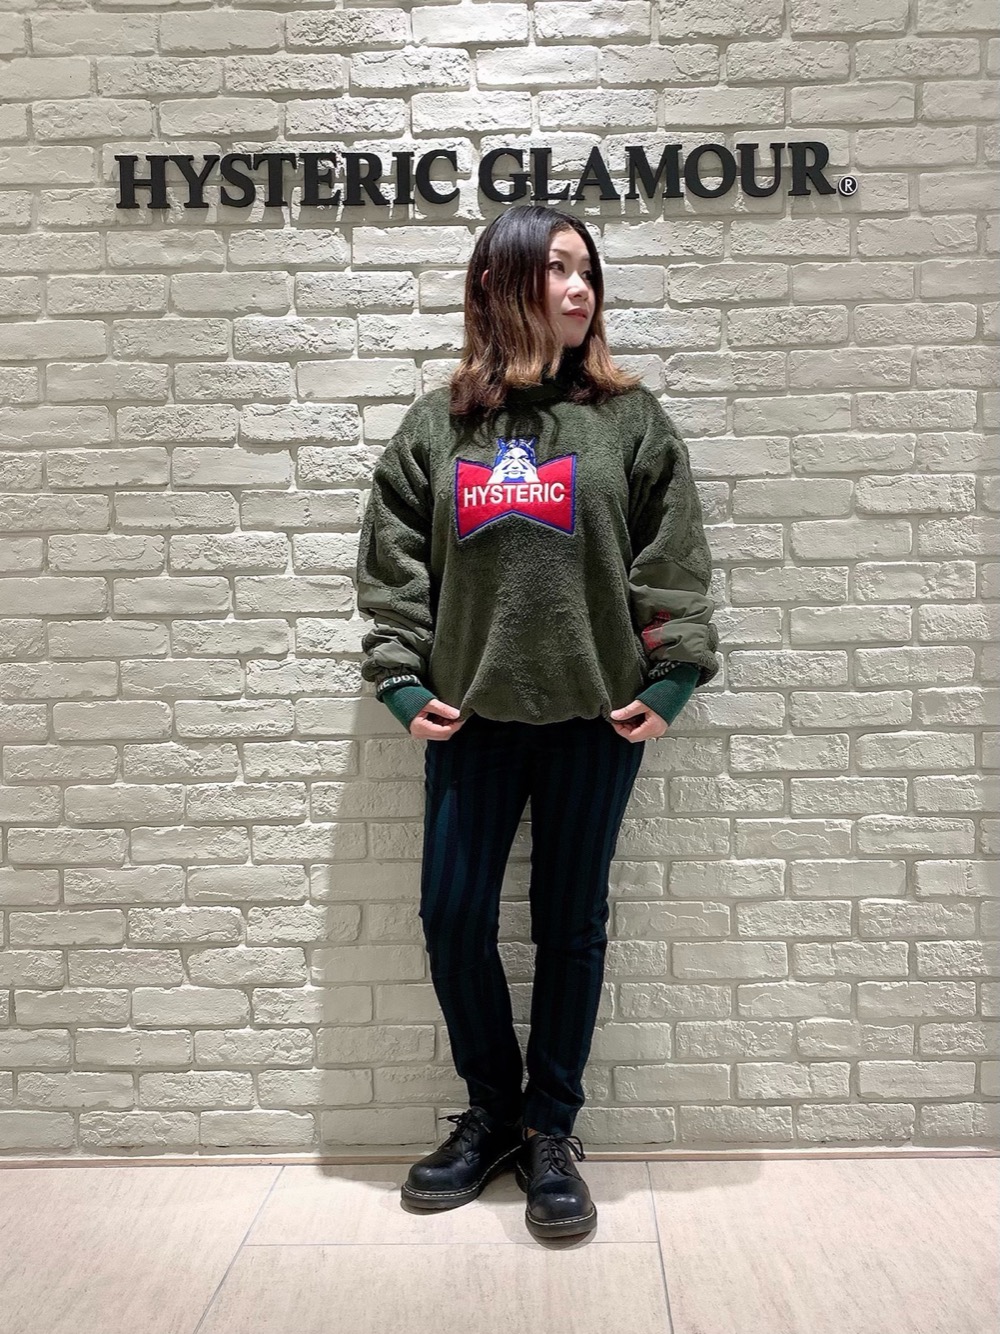 HYSTERIC GLAMOUR名古屋店HINAKO / HYSTERIC GLAMOUR styling